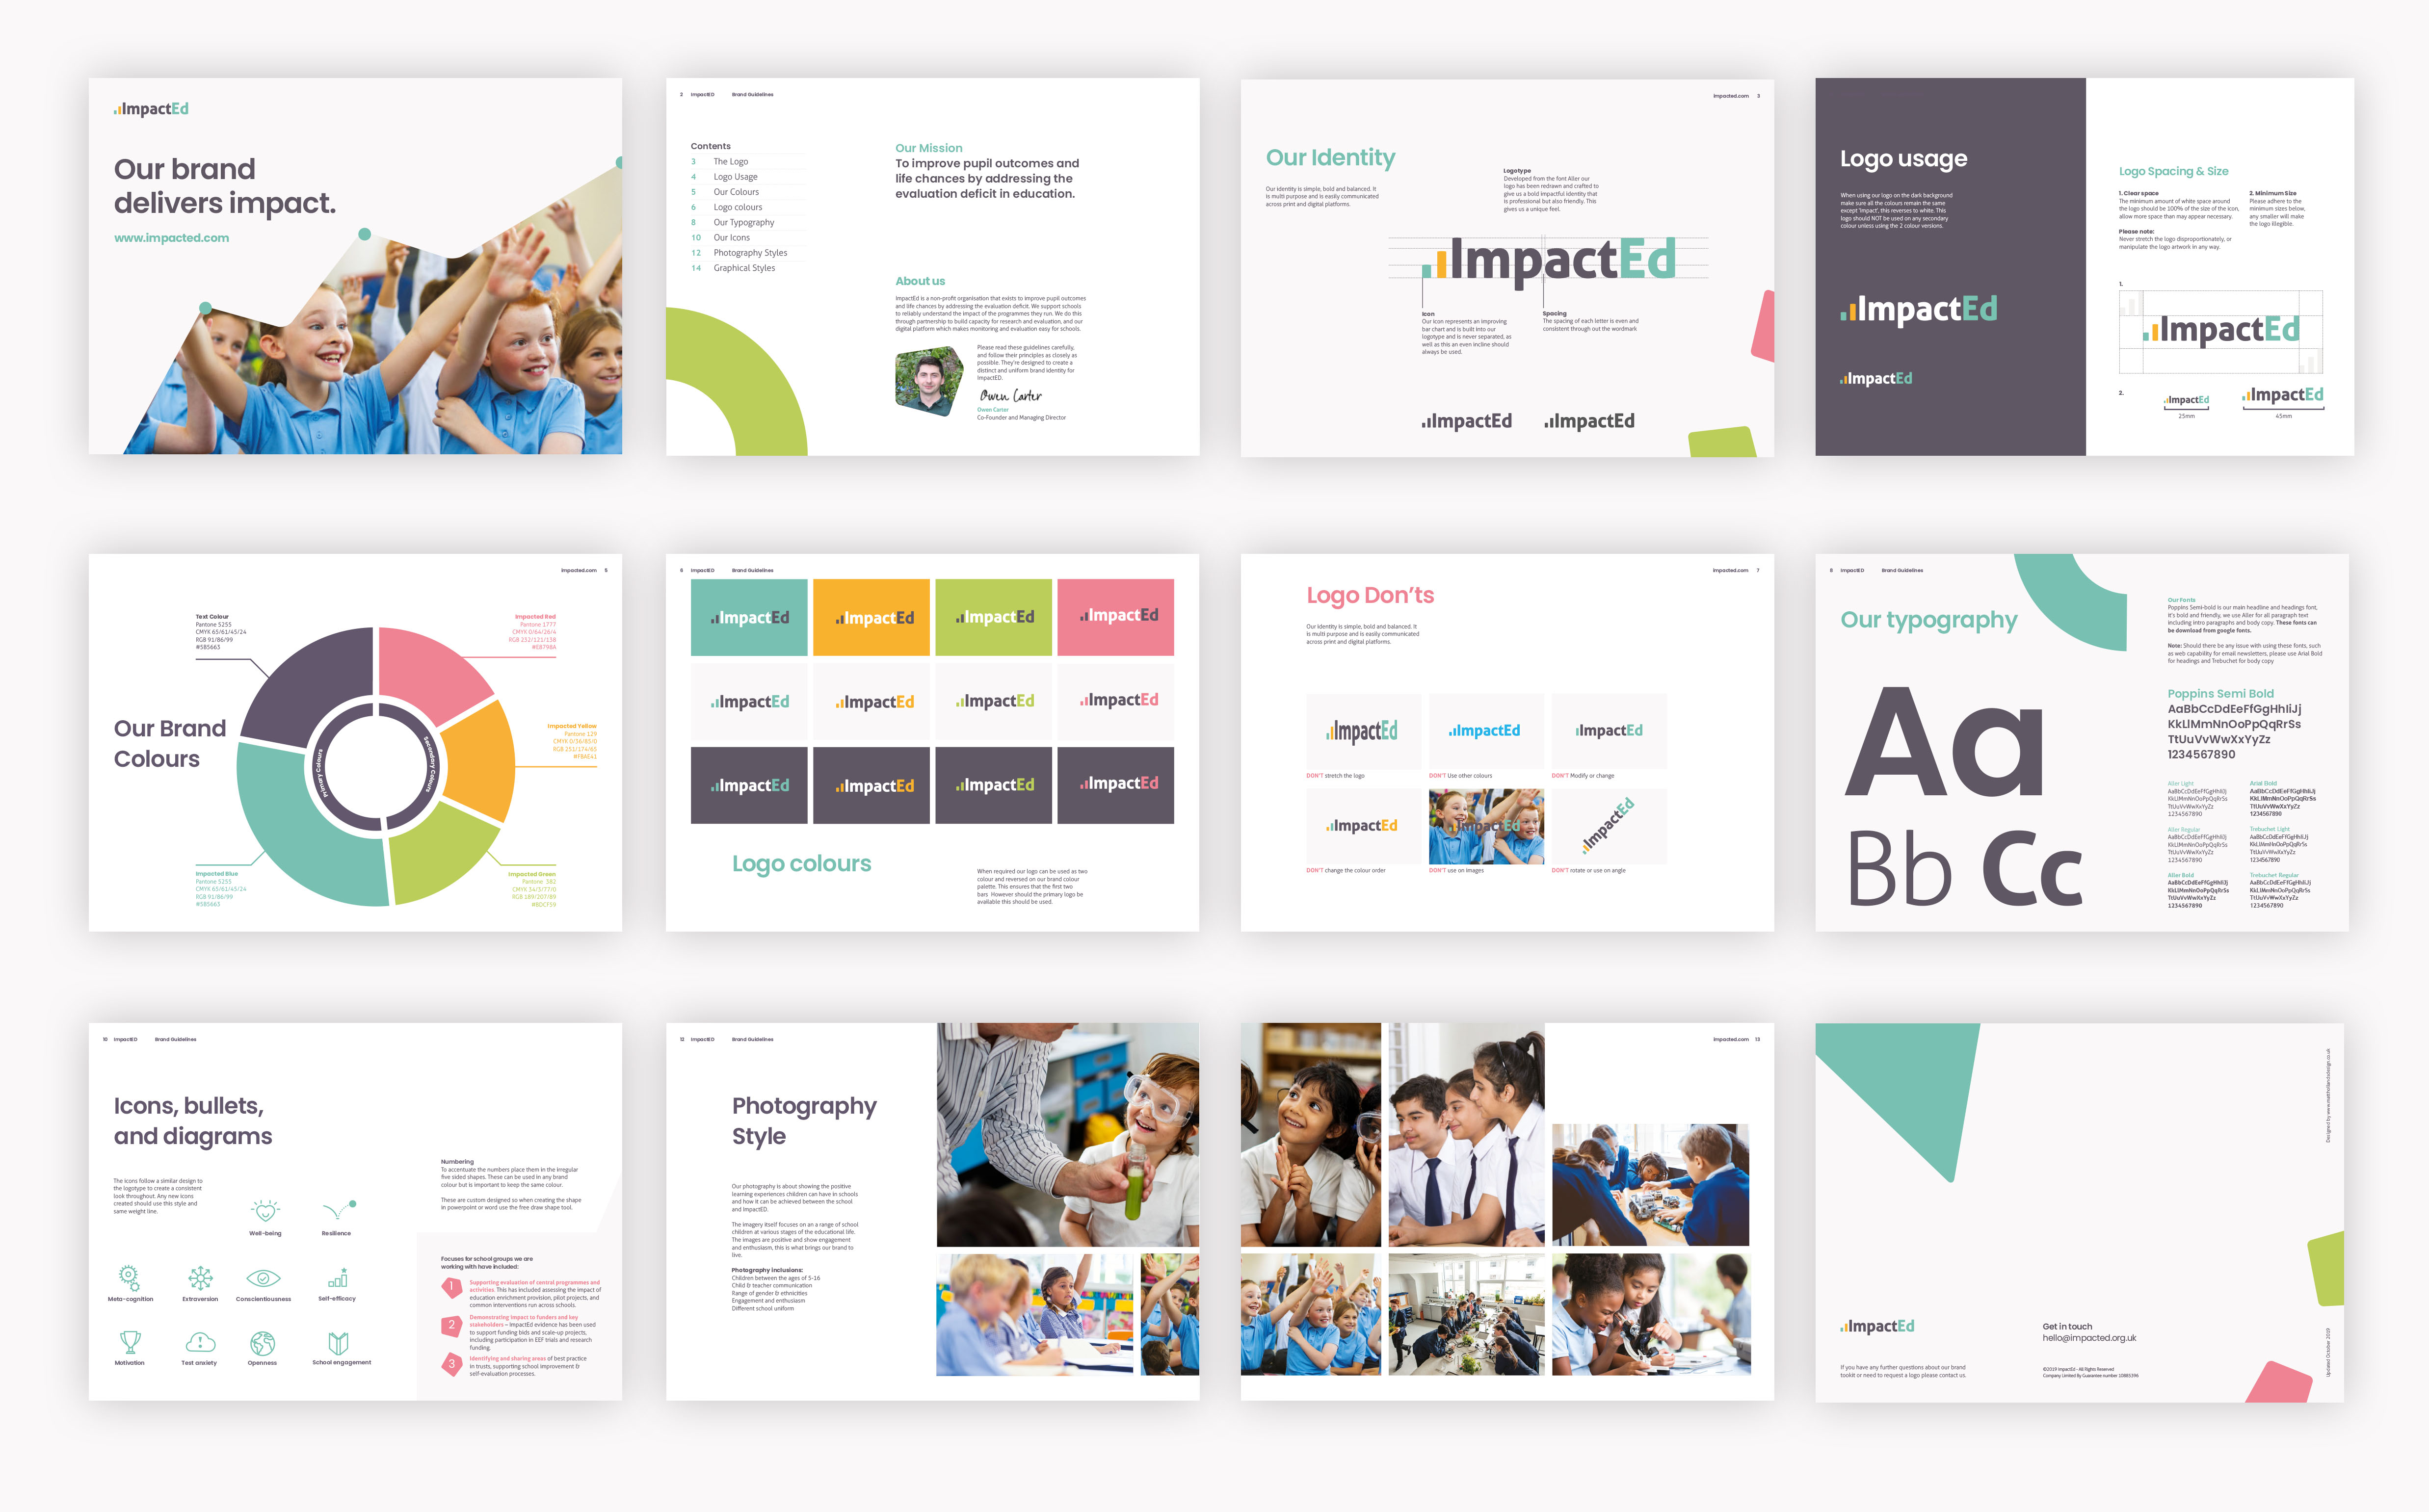 impacted-brand-guidelines-design